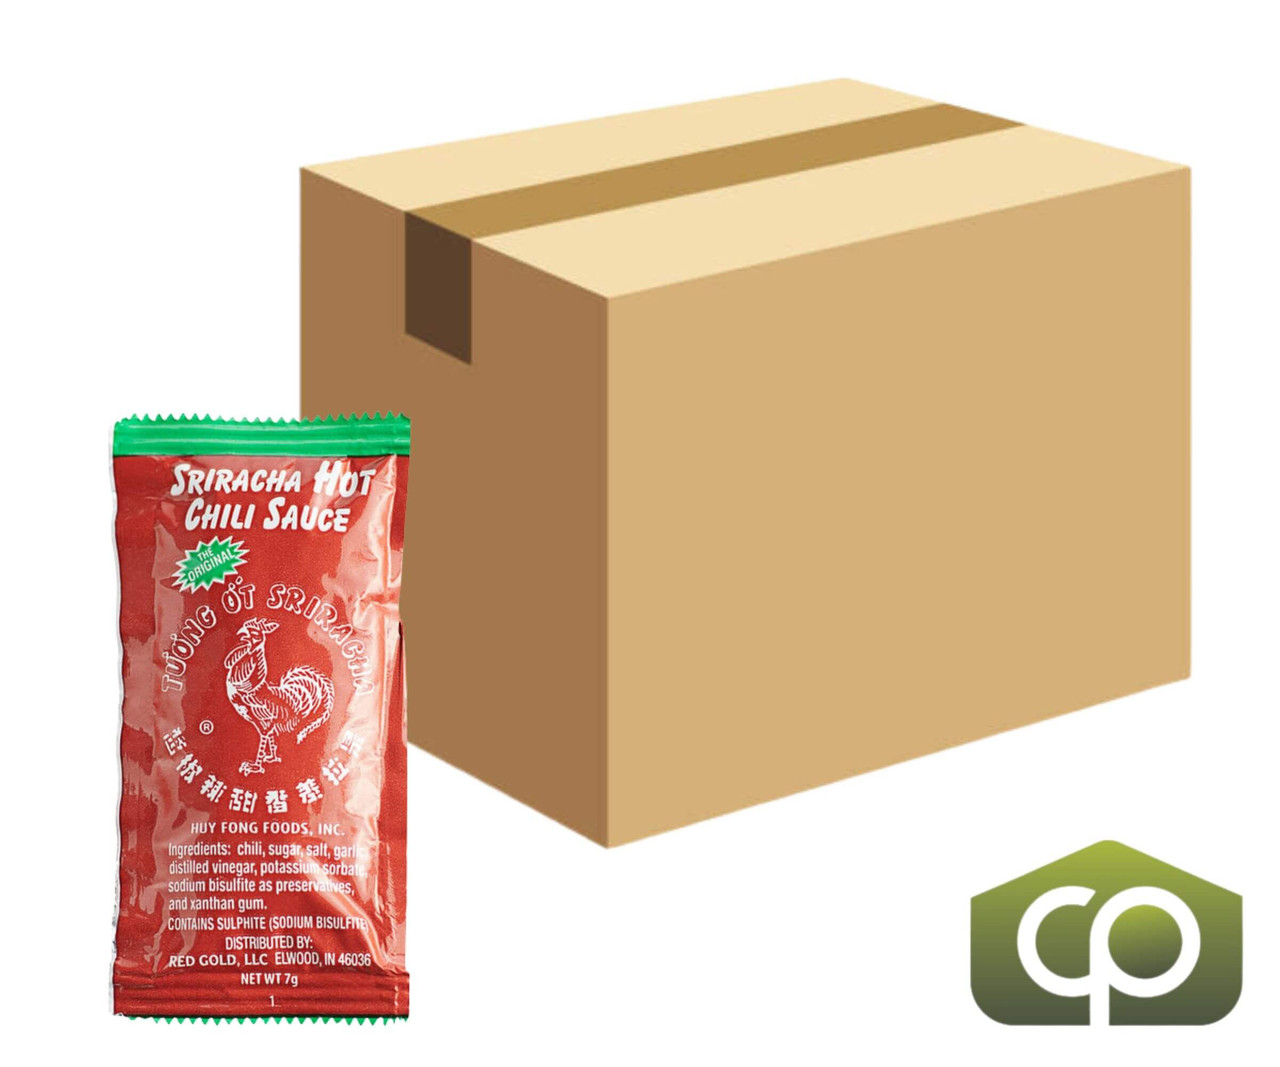 Huy Fong Sriracha Hot Chili Sauce Packets - 7g, 500/Case - Sun-Ripened Chilies - Chicken Pieces